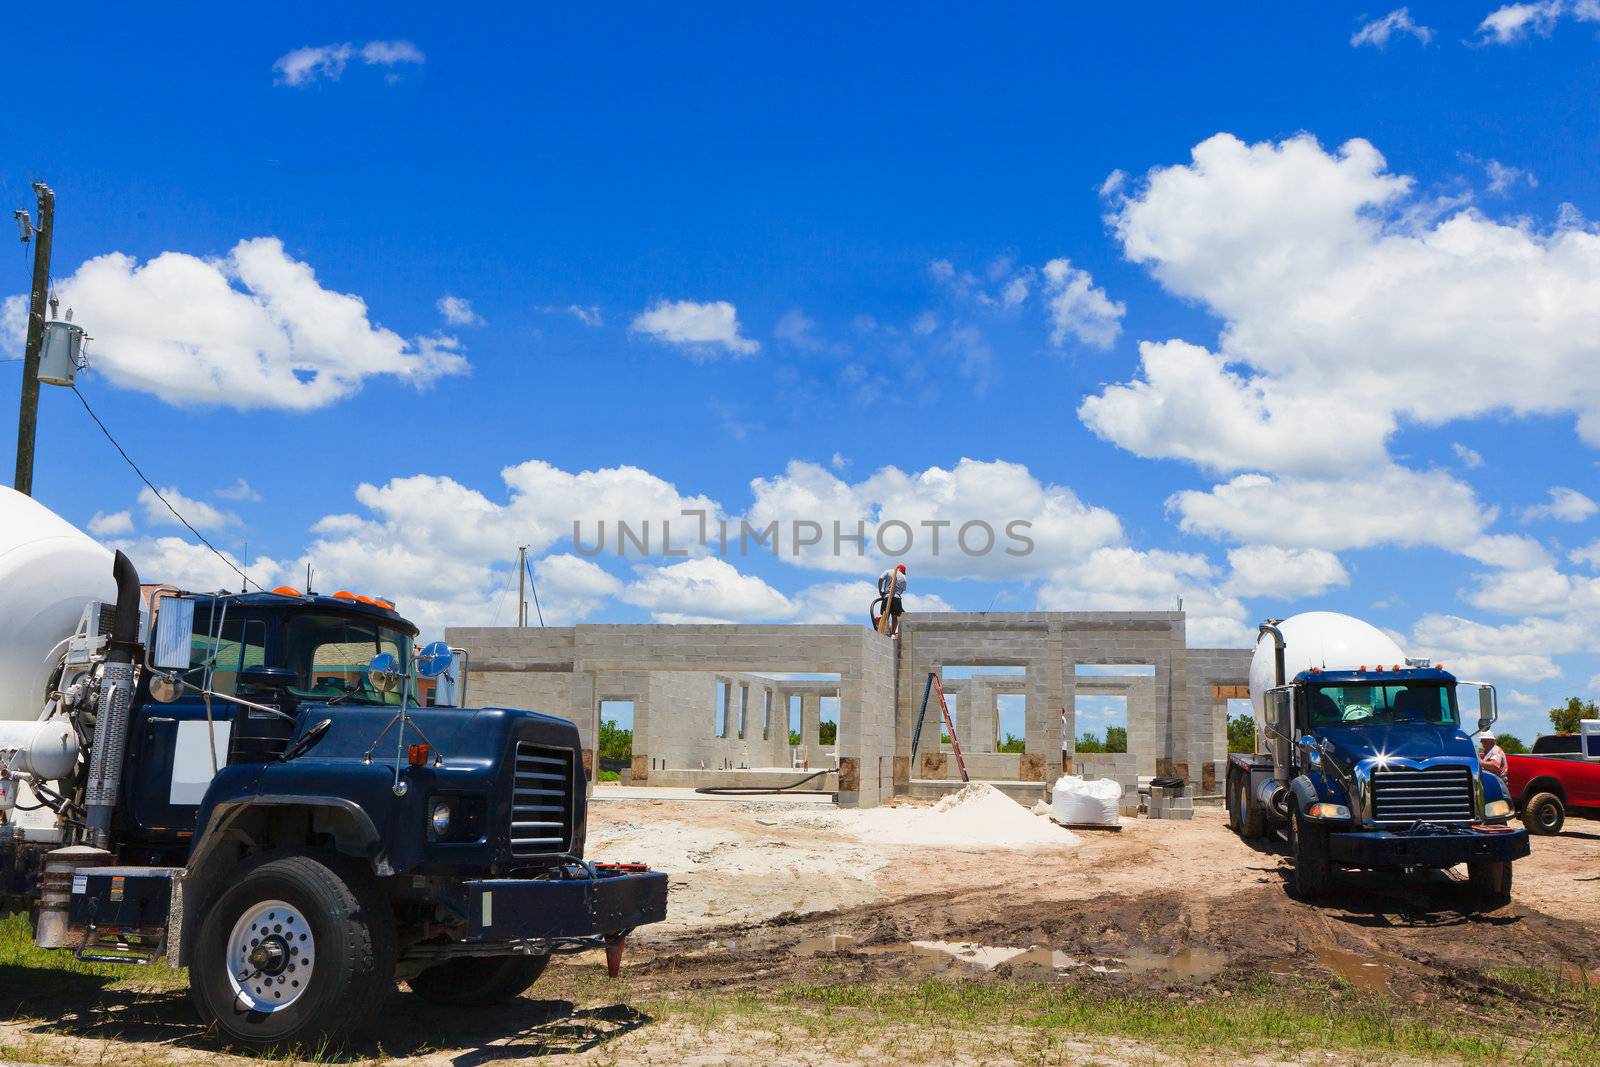 New cement block home with cement trucks and workers